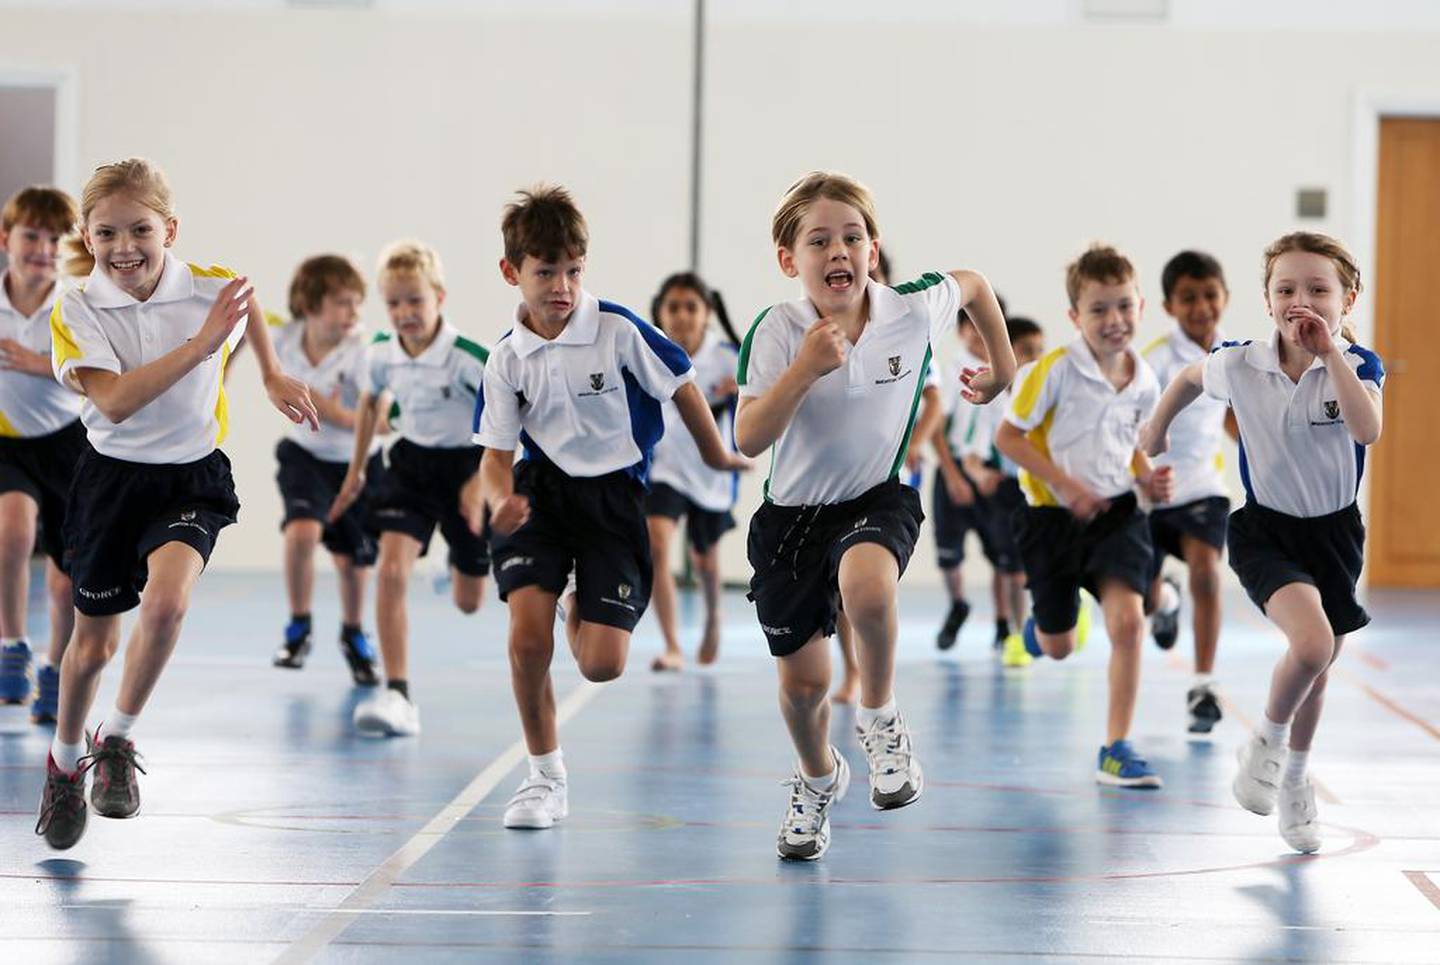 Year 3 pupils during physical education class at Brighton College Abu Dhabi. Pawan Singh / The National